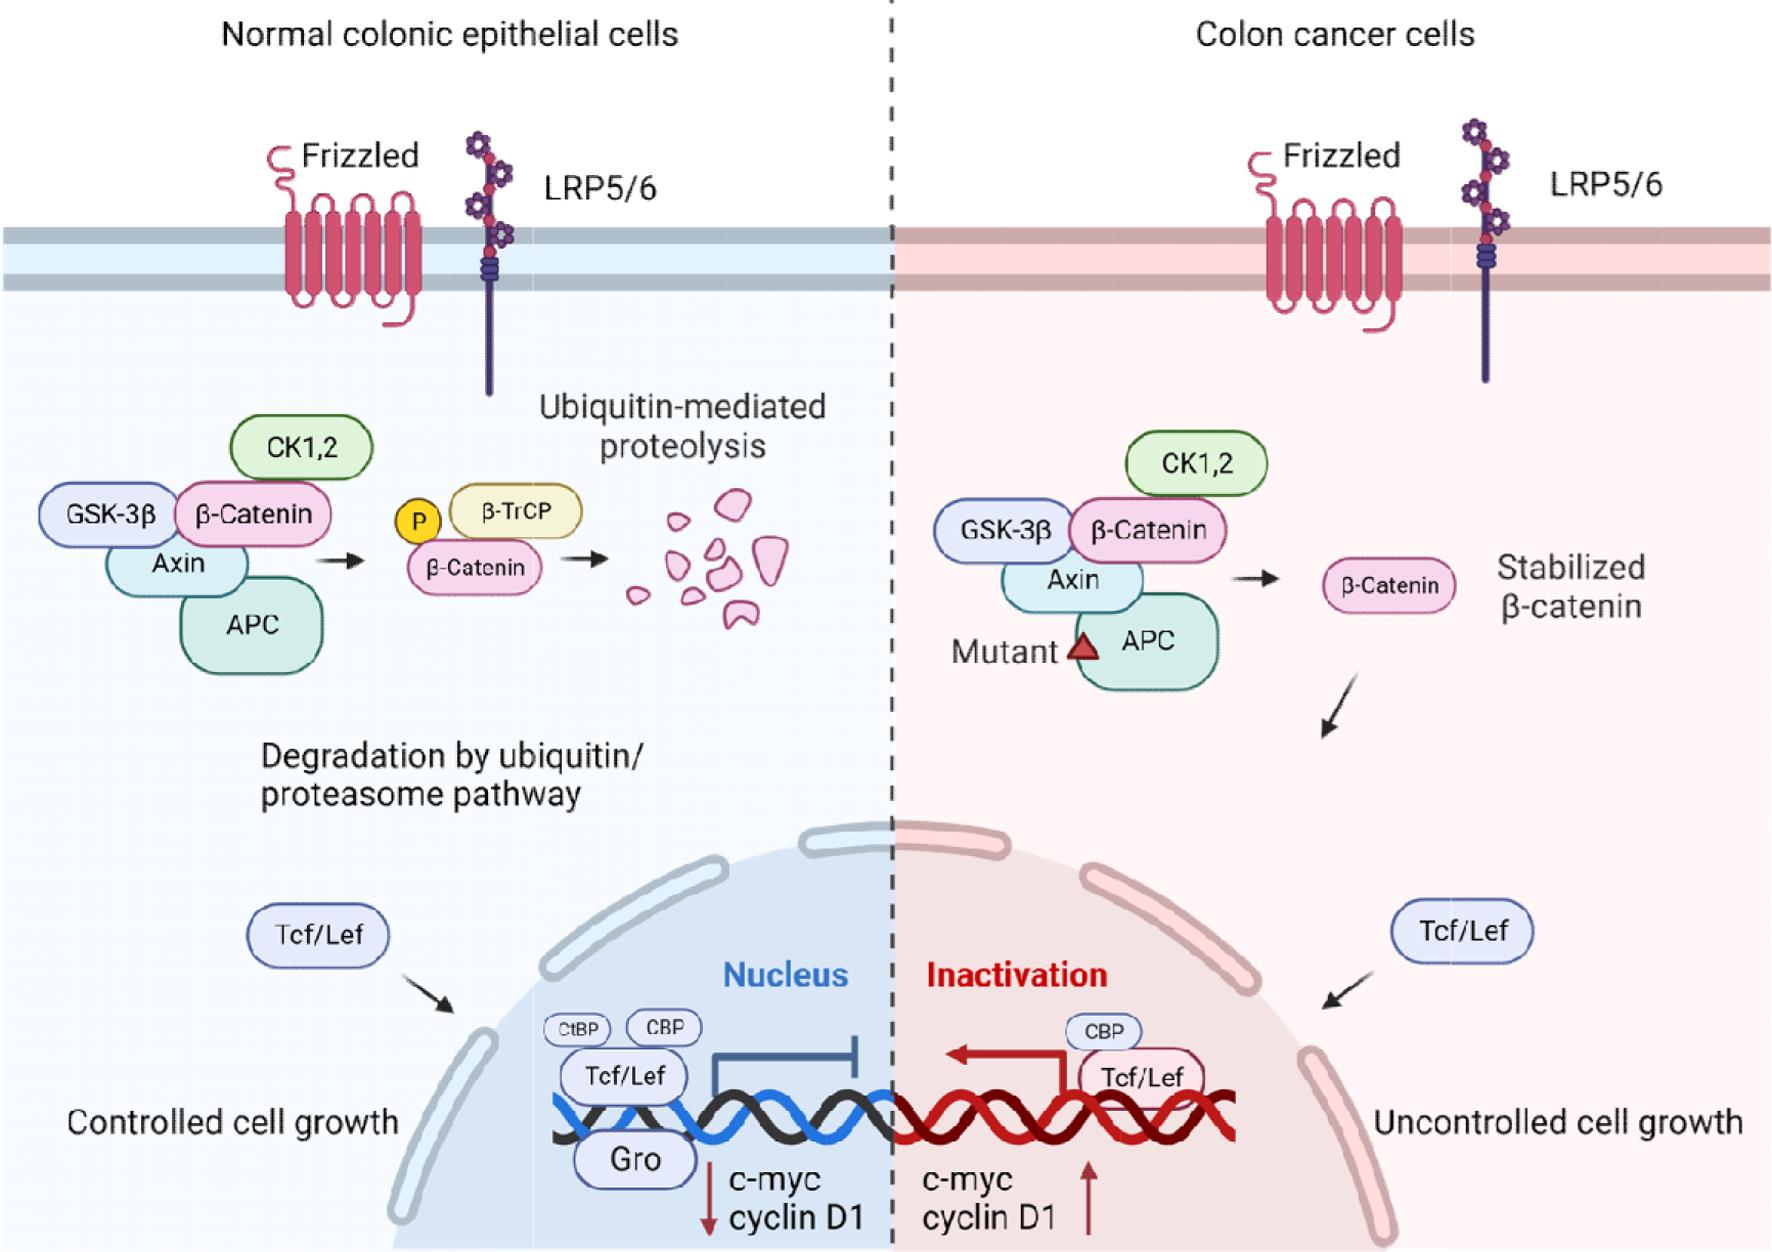 A schematic diagram showing the Wnt signaling pathway in normal colonic epithelial cells and colon cancer cells.